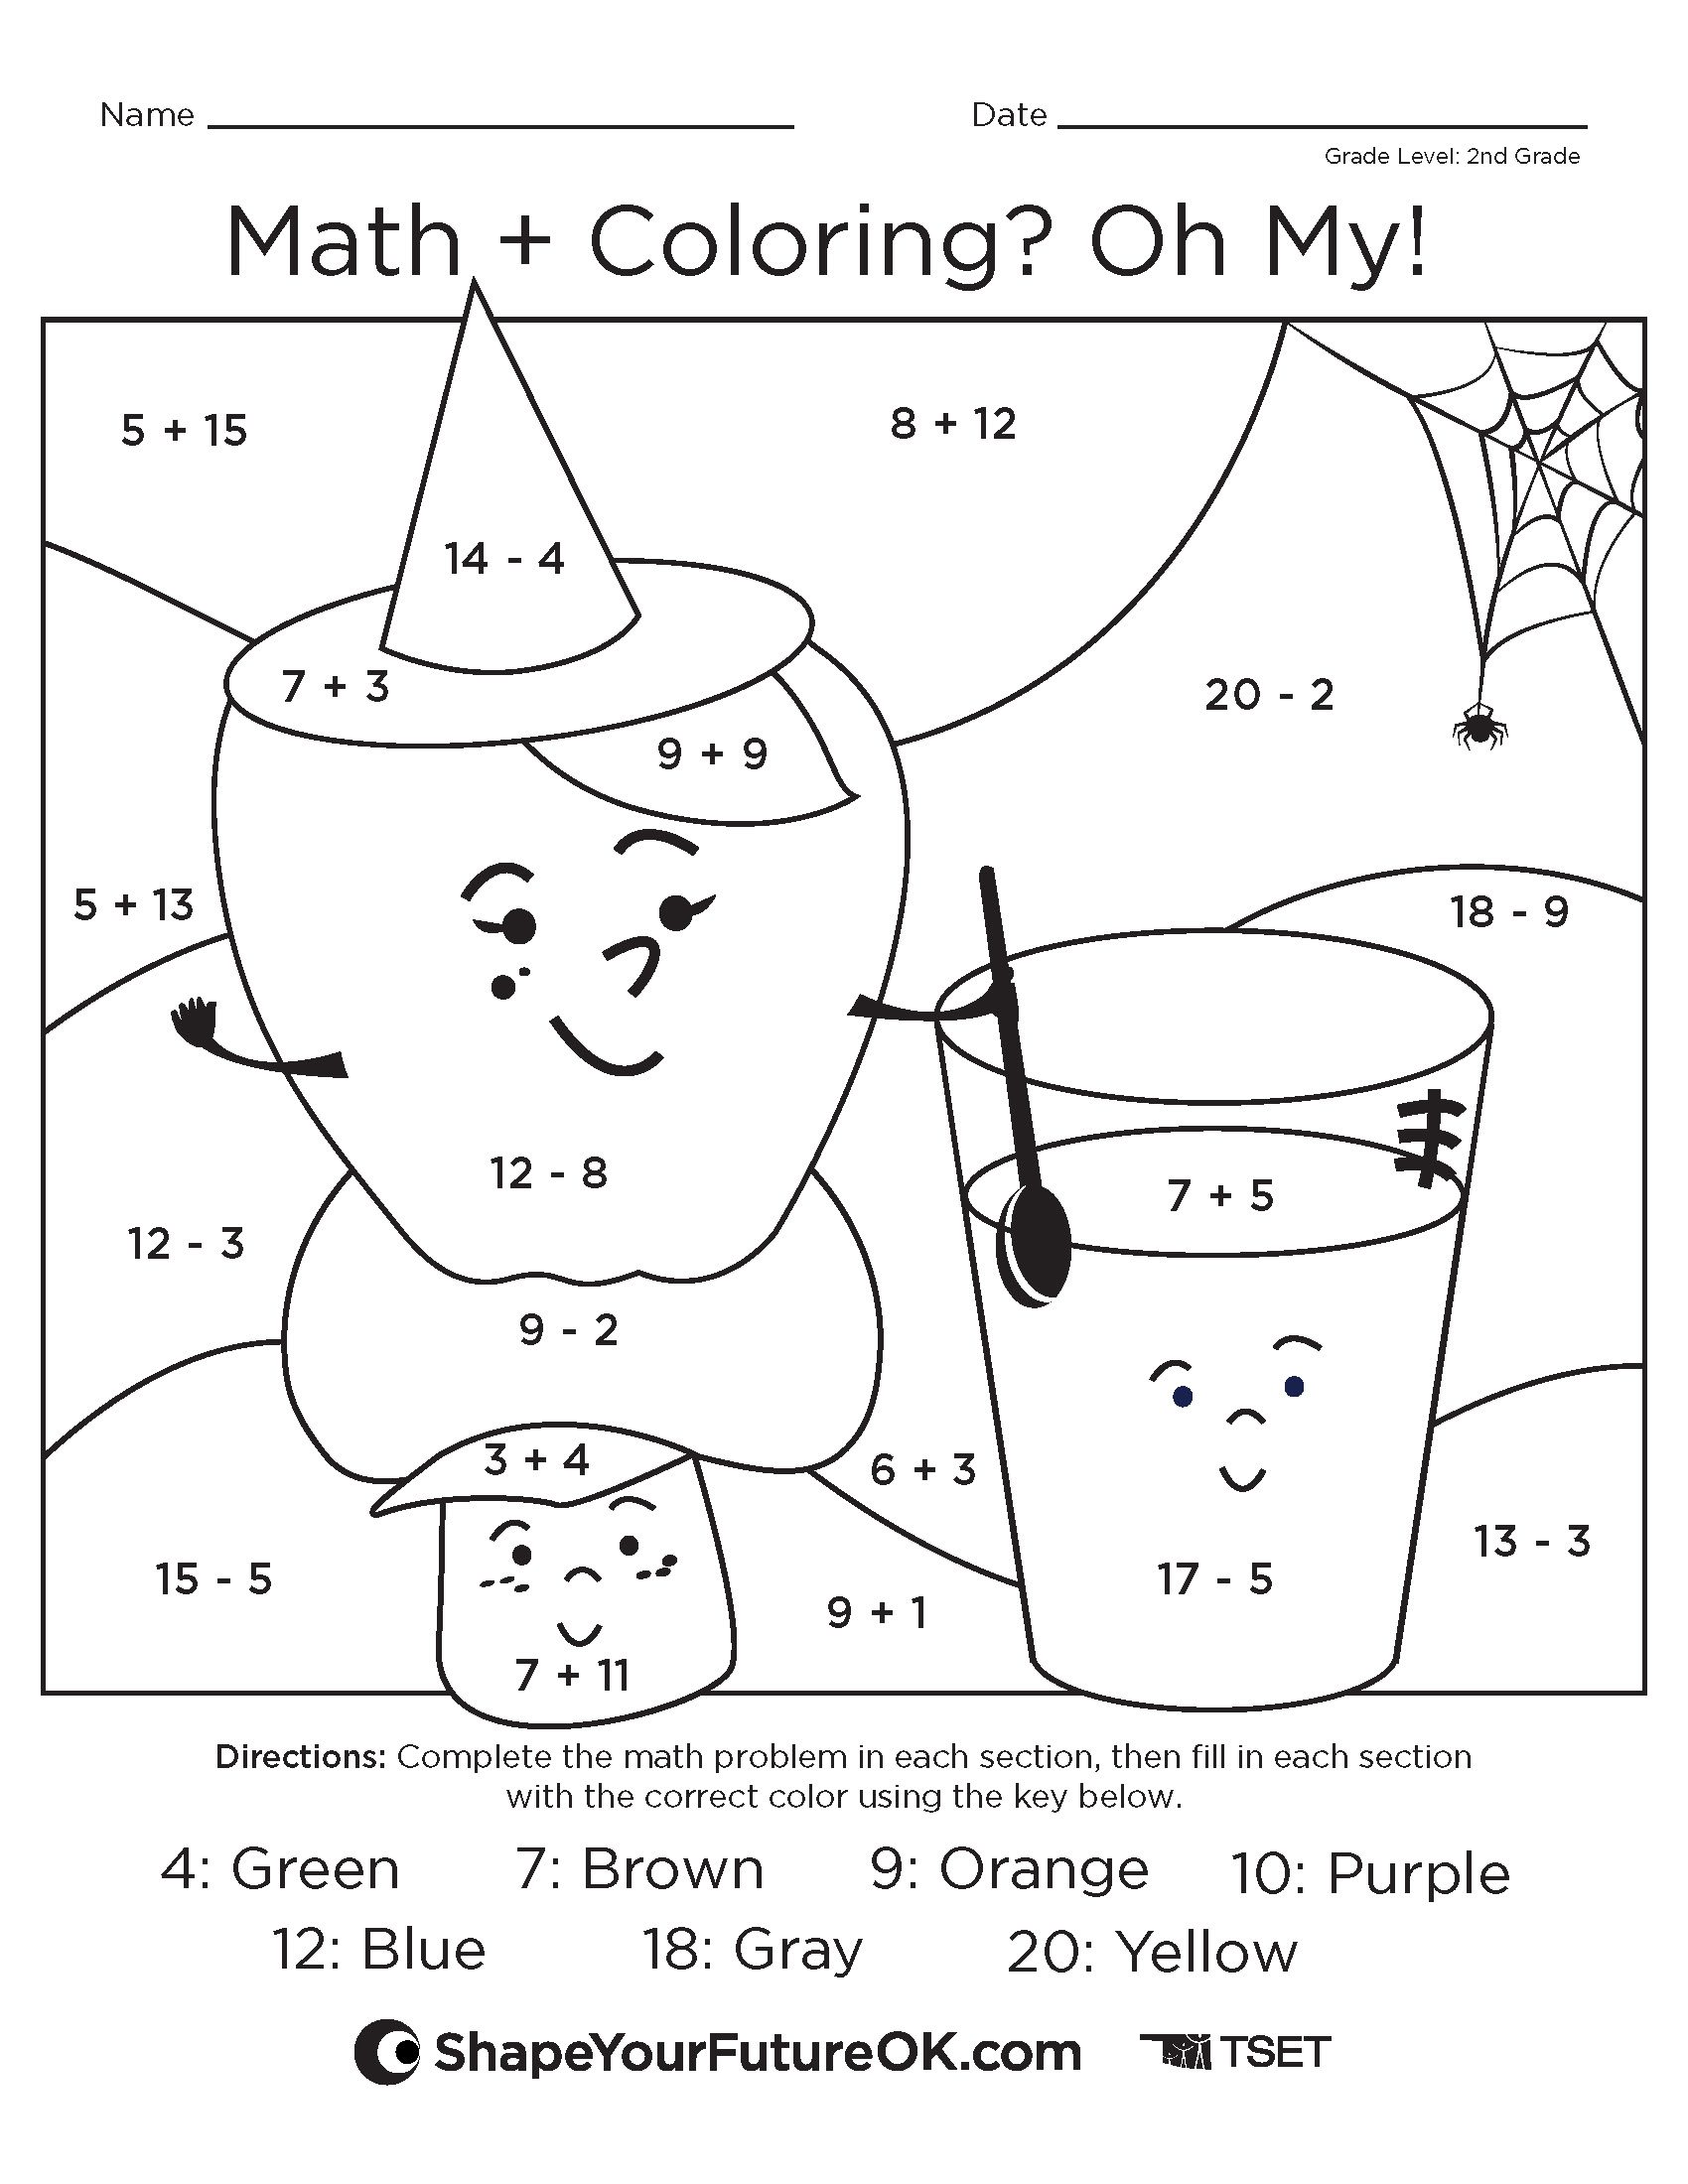 Math + Coloring? Oh my! Classroom worksheet